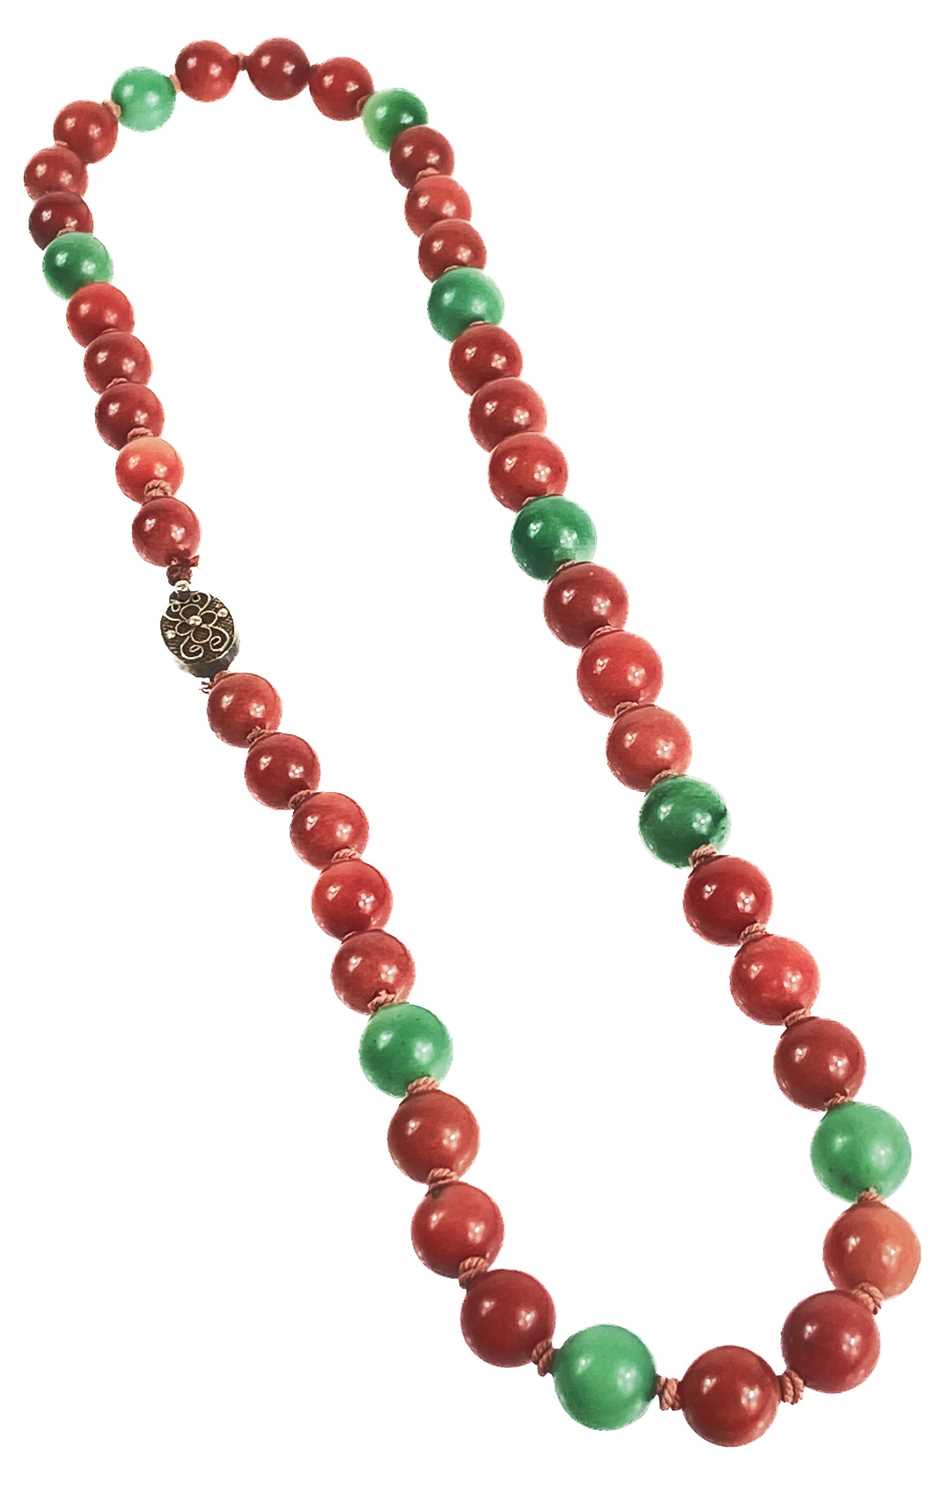 A Chinese green and russet jade bead necklace with silver filigree clasp. - Image 2 of 11